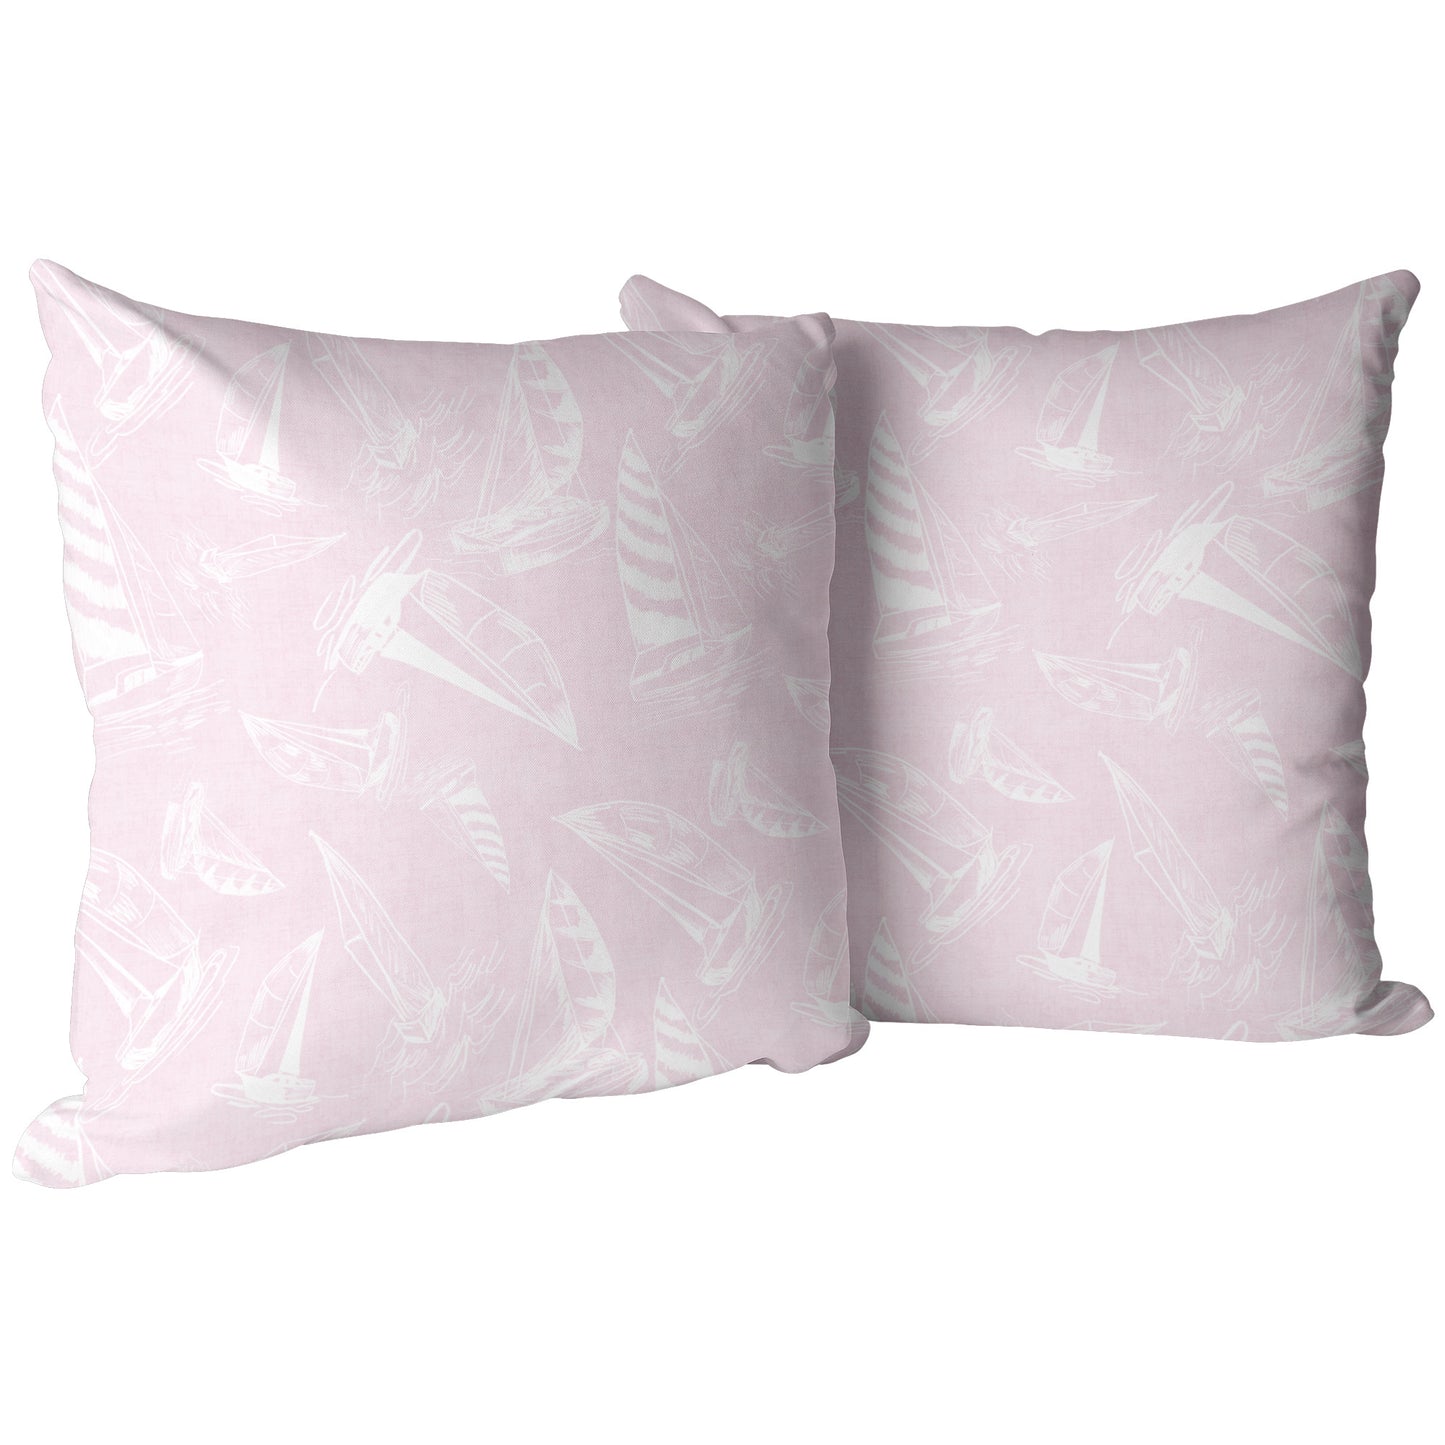 Sailboat Sketches on Pink Linen Textured Background, Throw Pillow